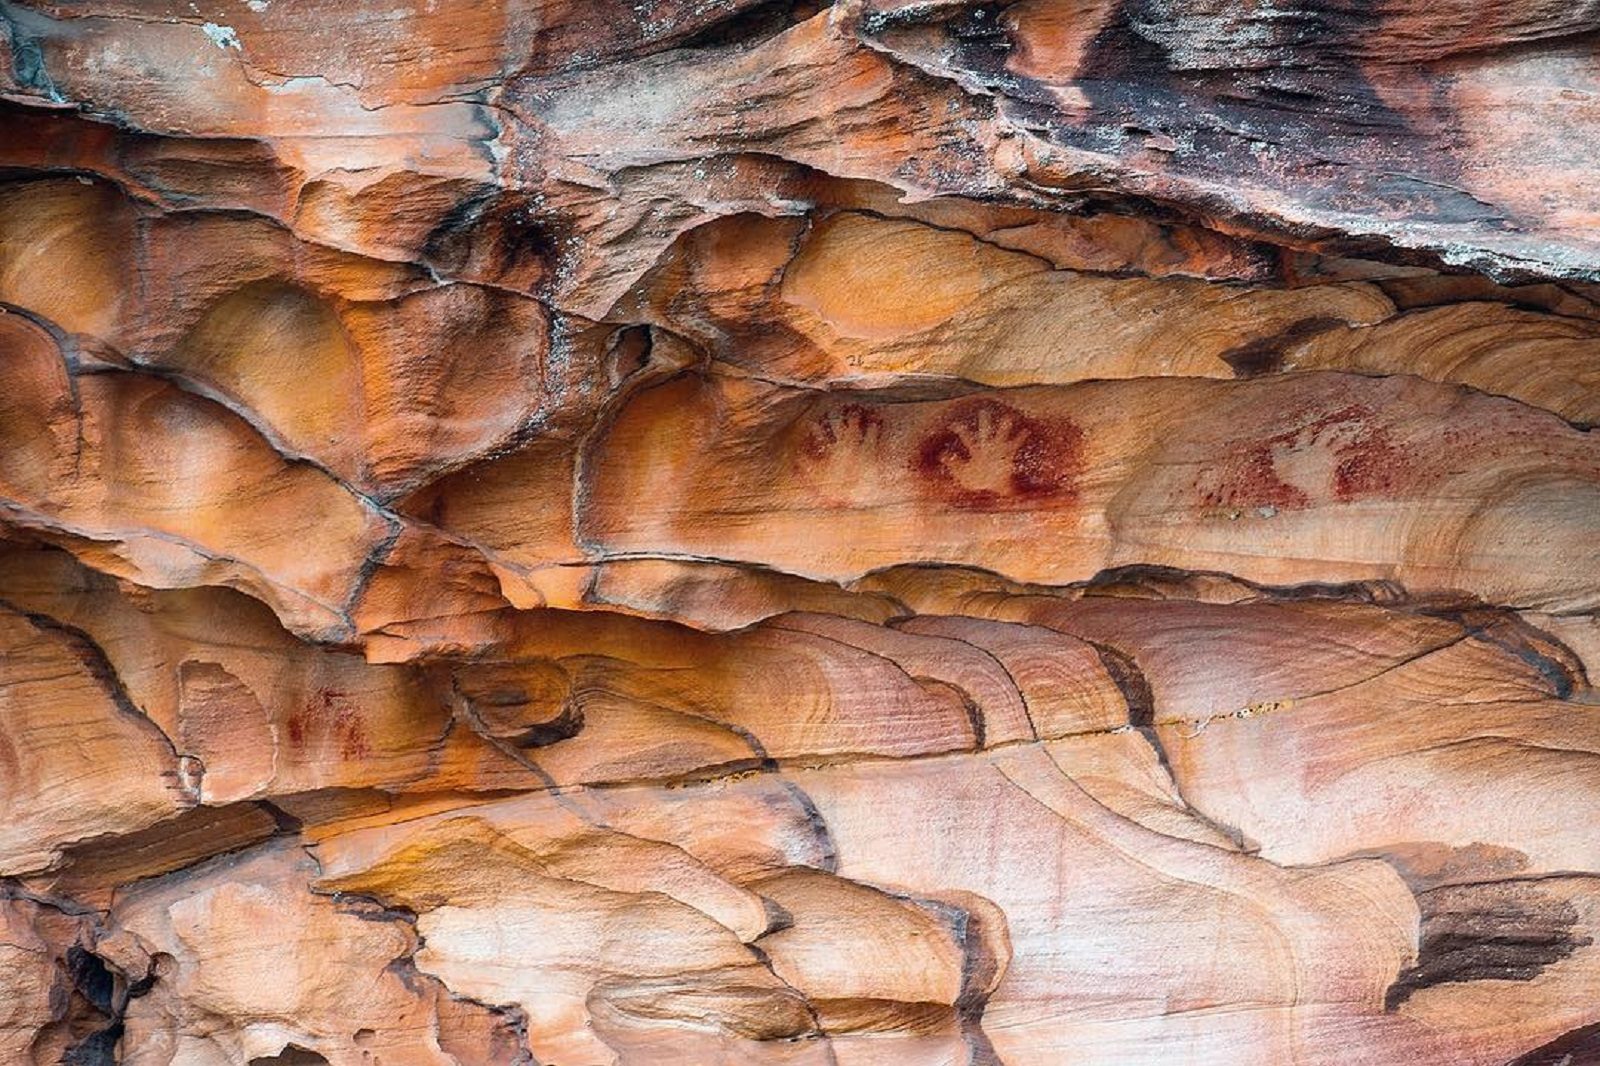 Red Hands Cave walking track in Ku-ring-gai Chase National Park. Photo: Instagram @between.the.seas